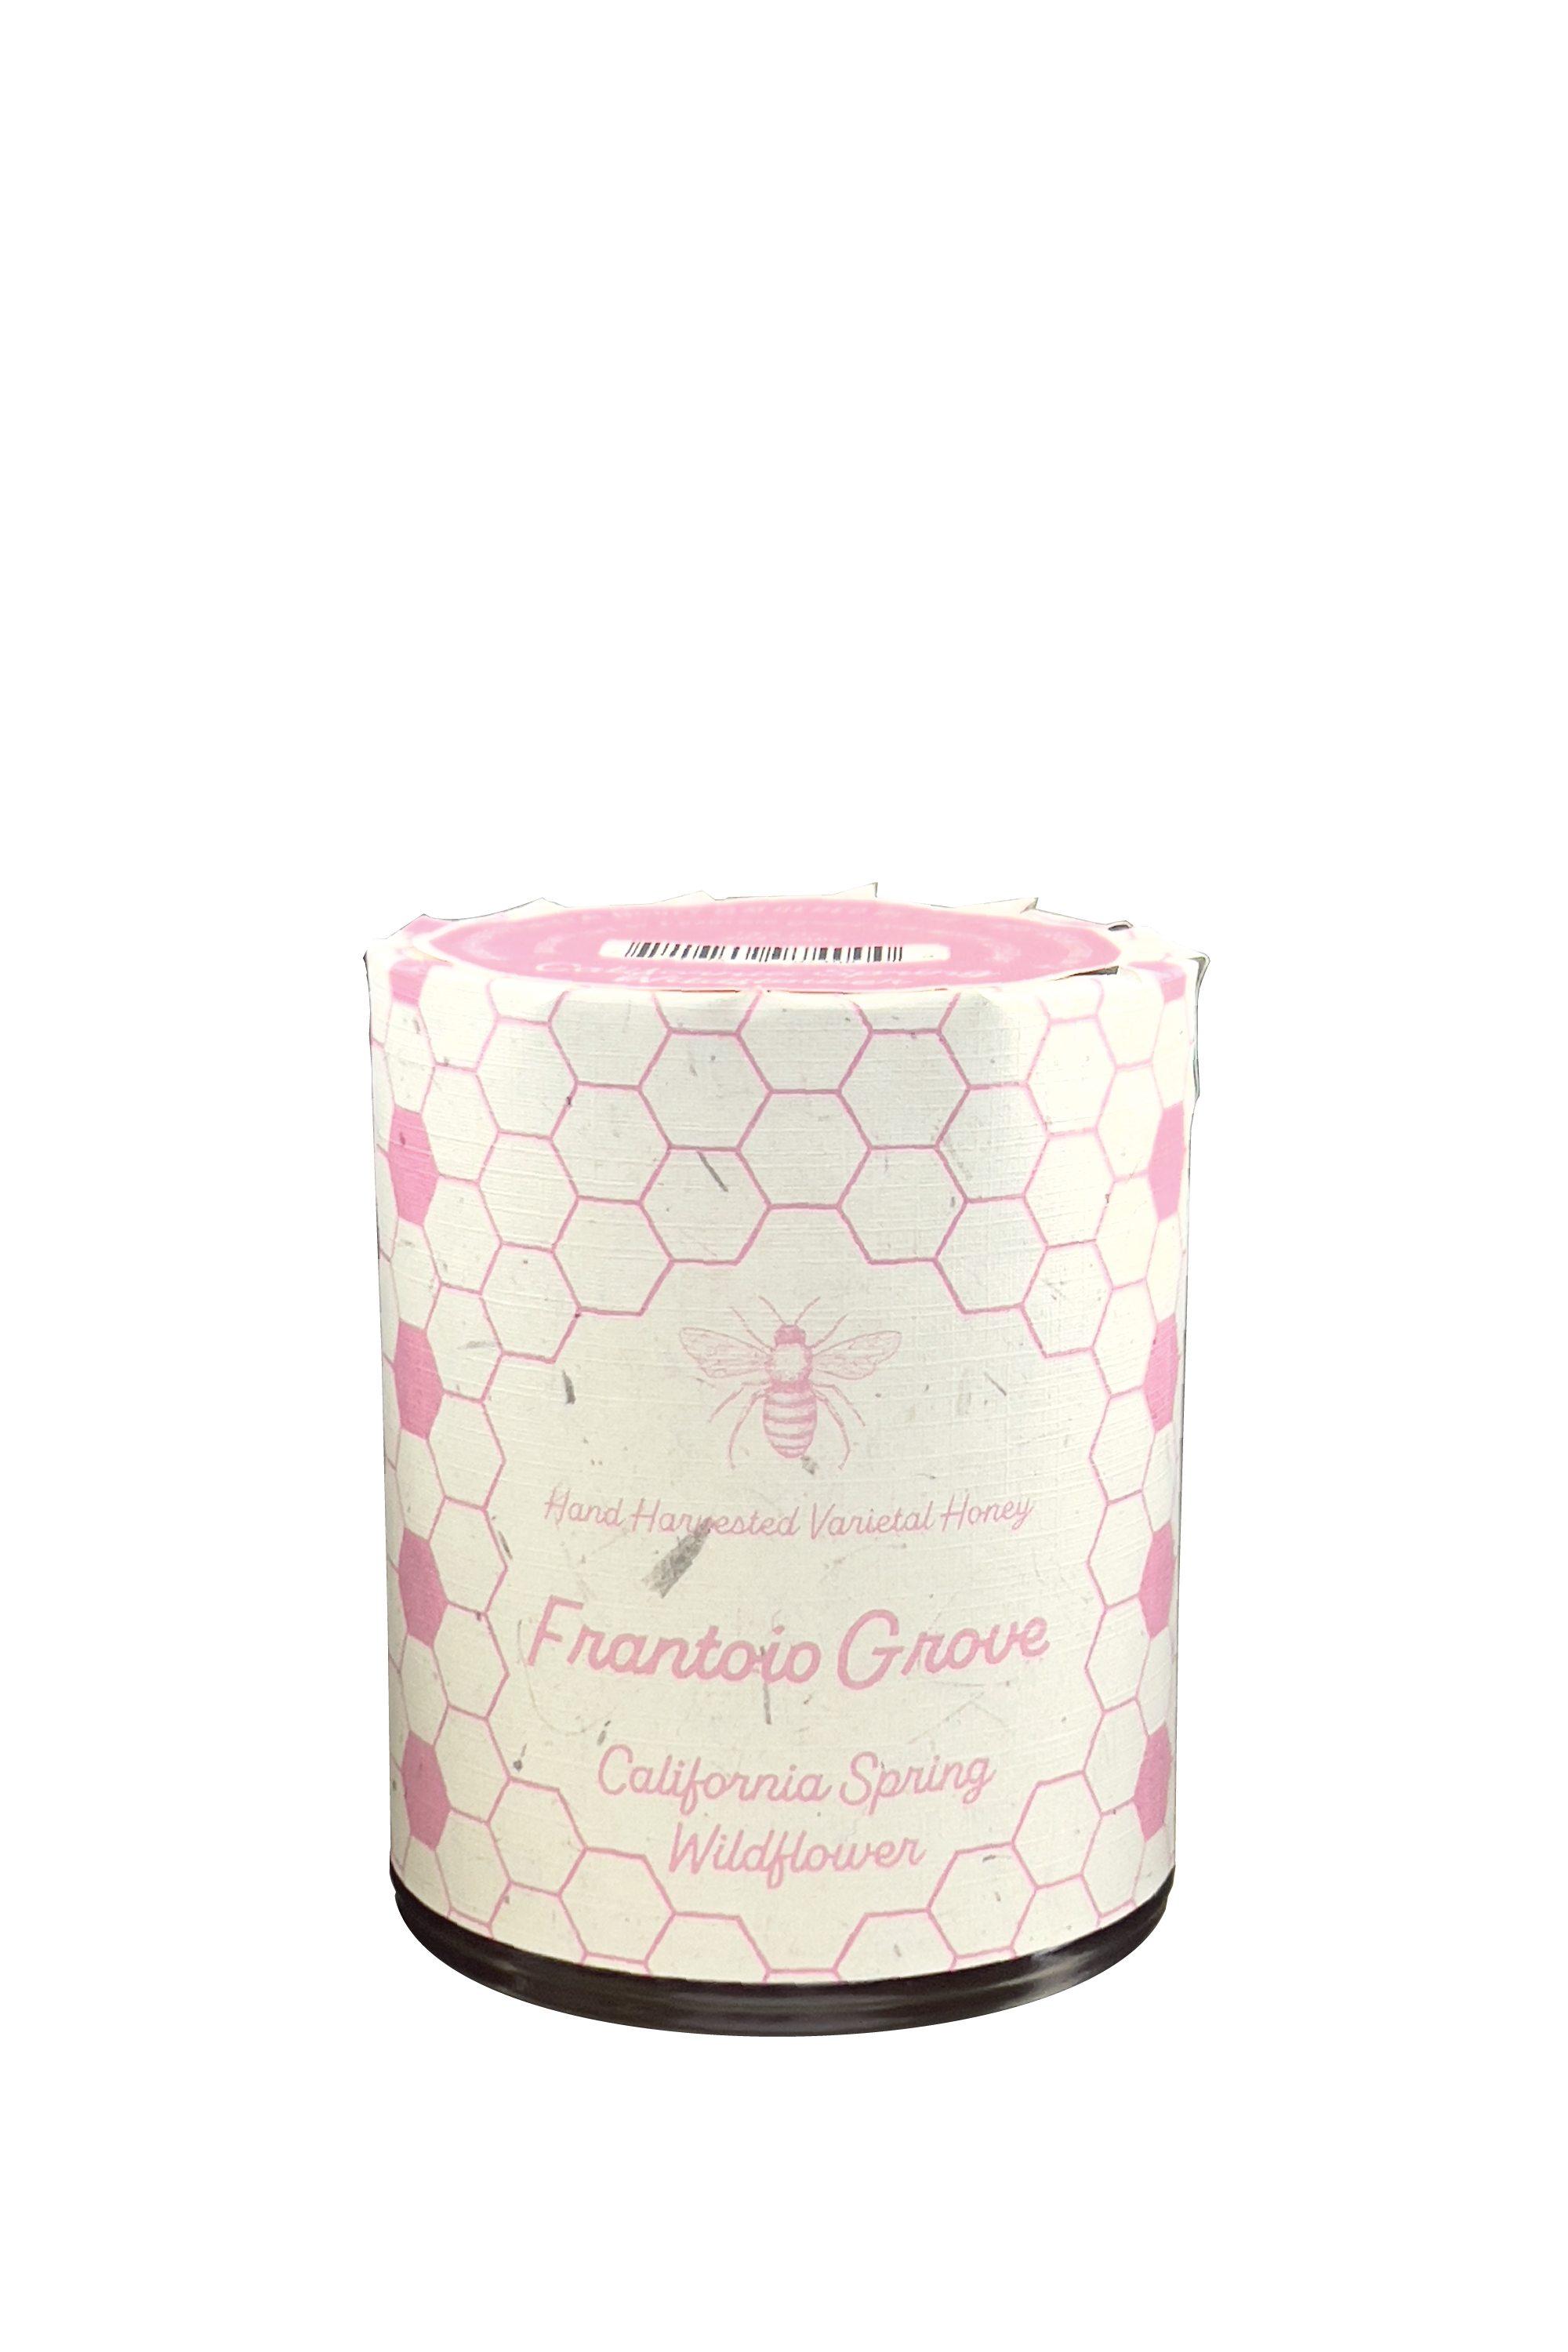 Image of a jar of Frantoio Grove's hand harvested California Spring Wildflower Honey on a White Background. Jar is wrapped in white paper with art depicting a bee and a pattern of alternating pink and white honeycomb.